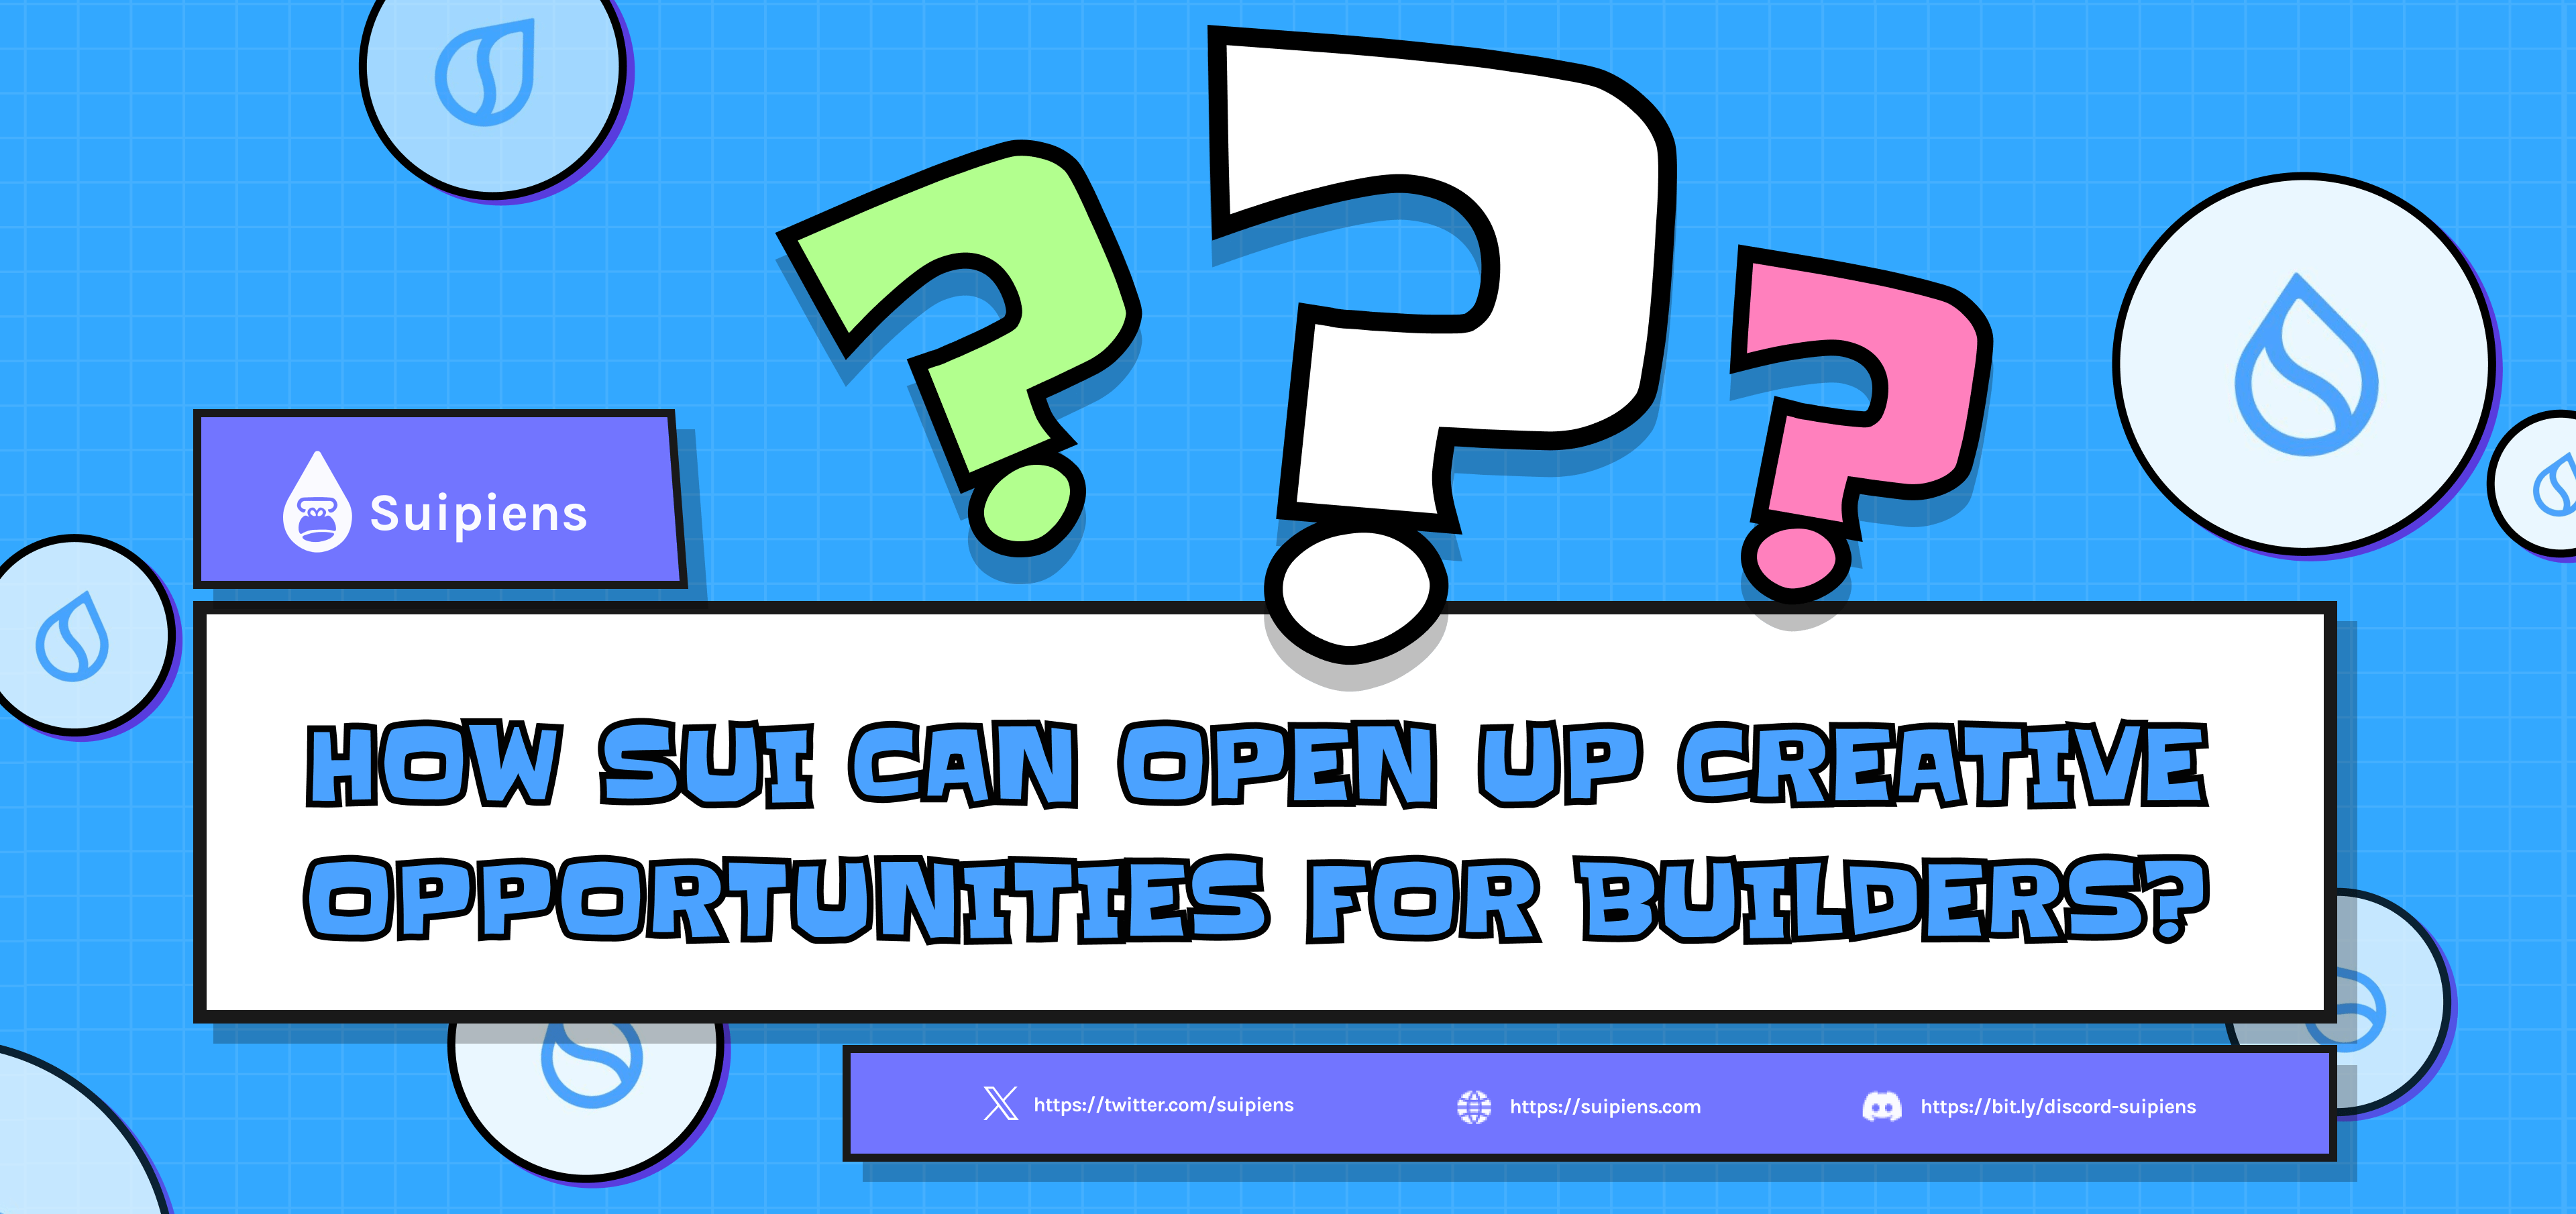 How Sui Can Open Up Creative Opportunities For Builders?